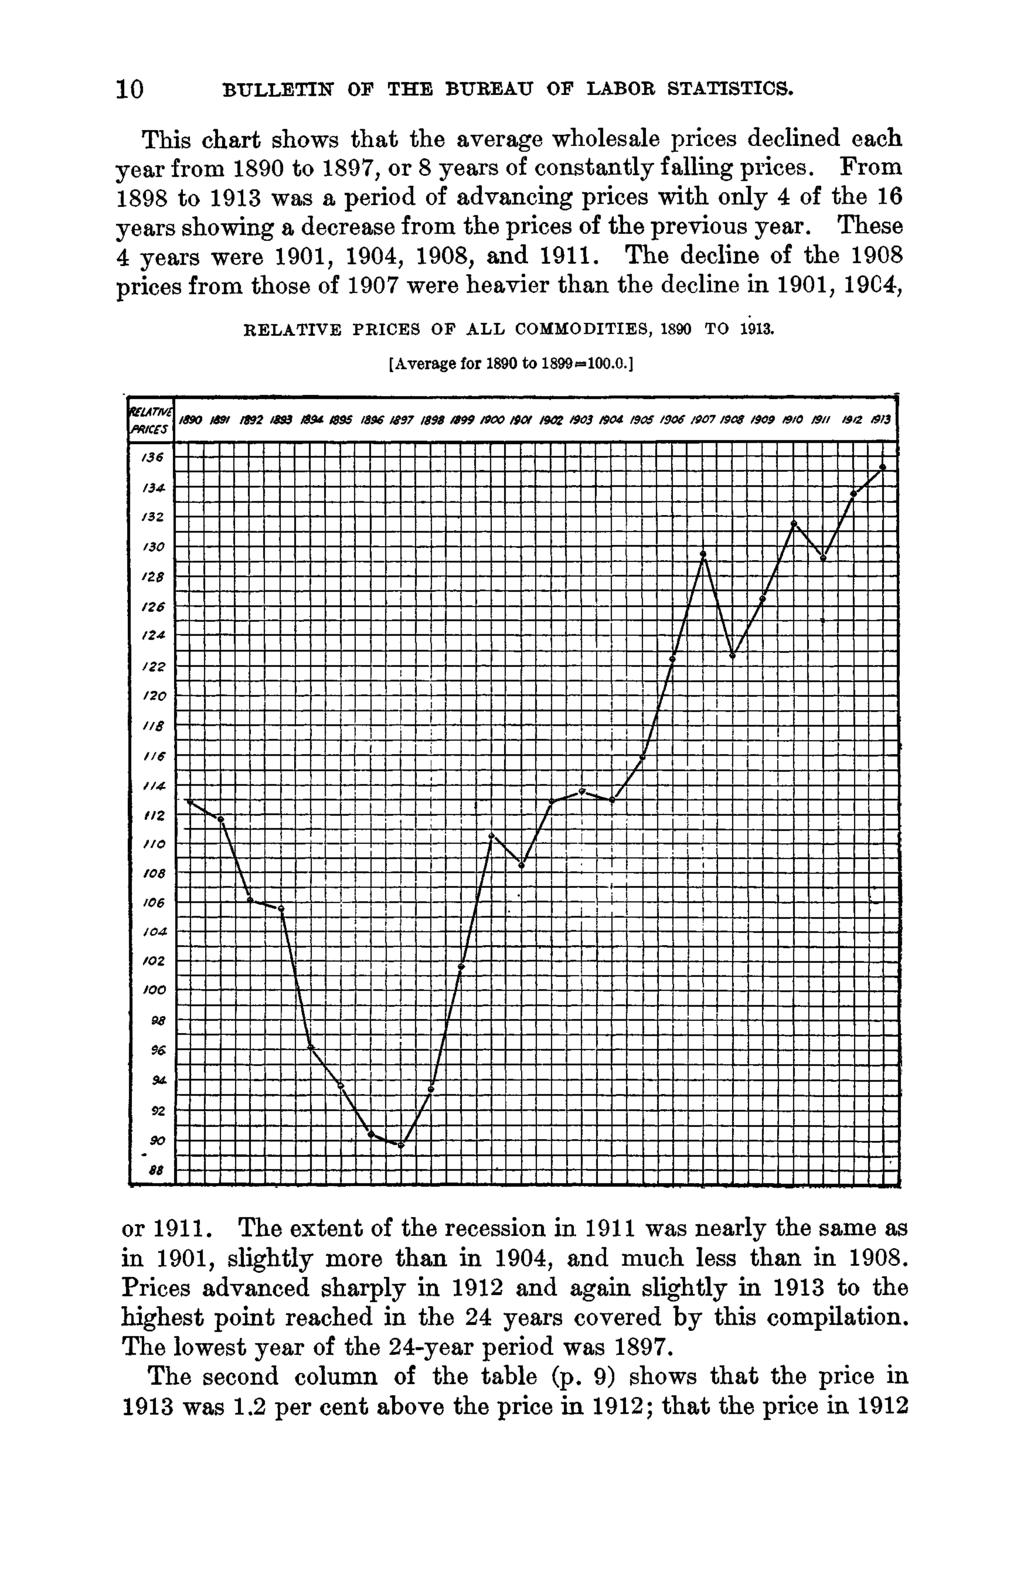 1 0 BULLETIN OF THE BUREAU OF LABOR STATISTICS. This chart shows that the average wholesale s declined each year from 1890 to 1897, or 8 years of constantly falling s.